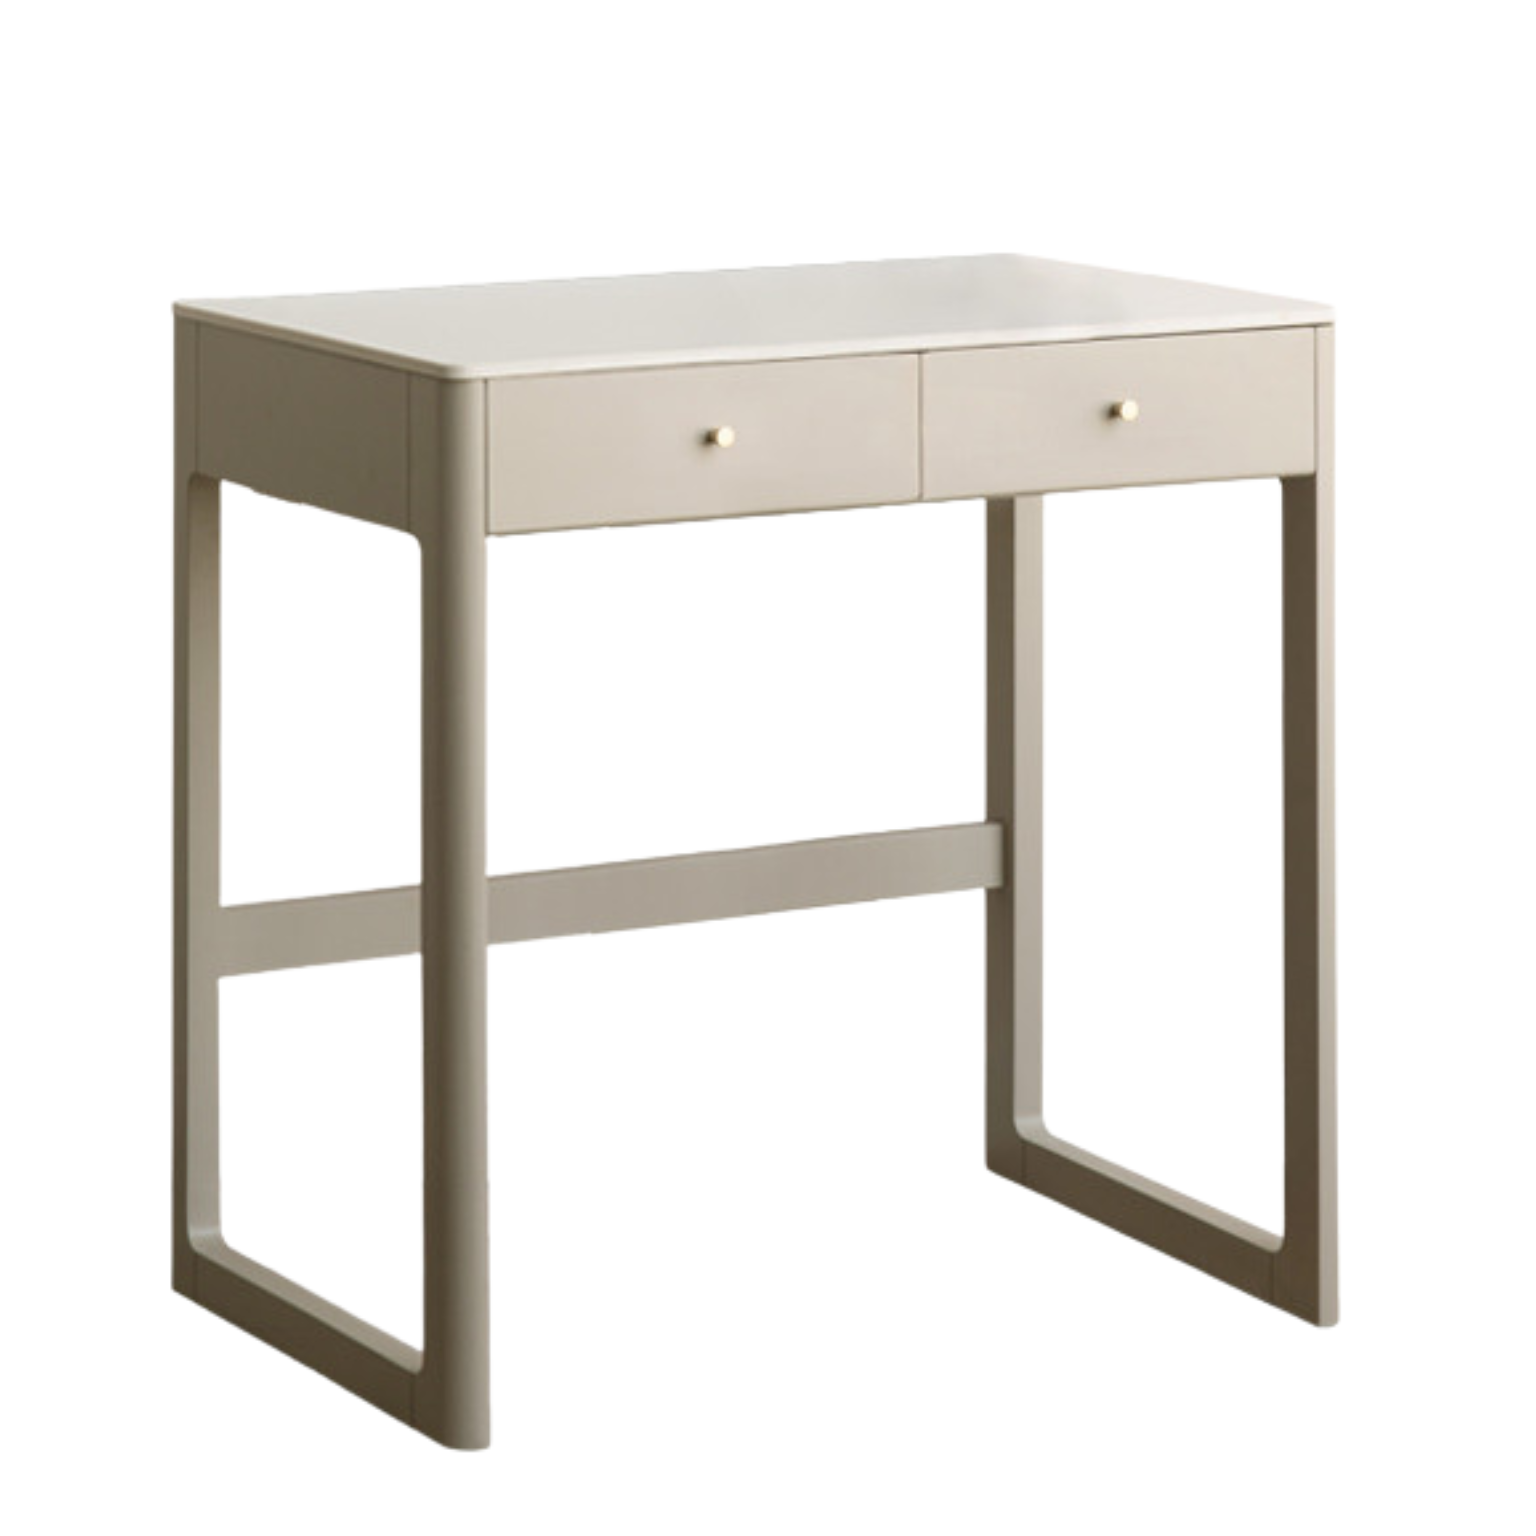 Poplar solid wood Office desk, small dressing table slate top :